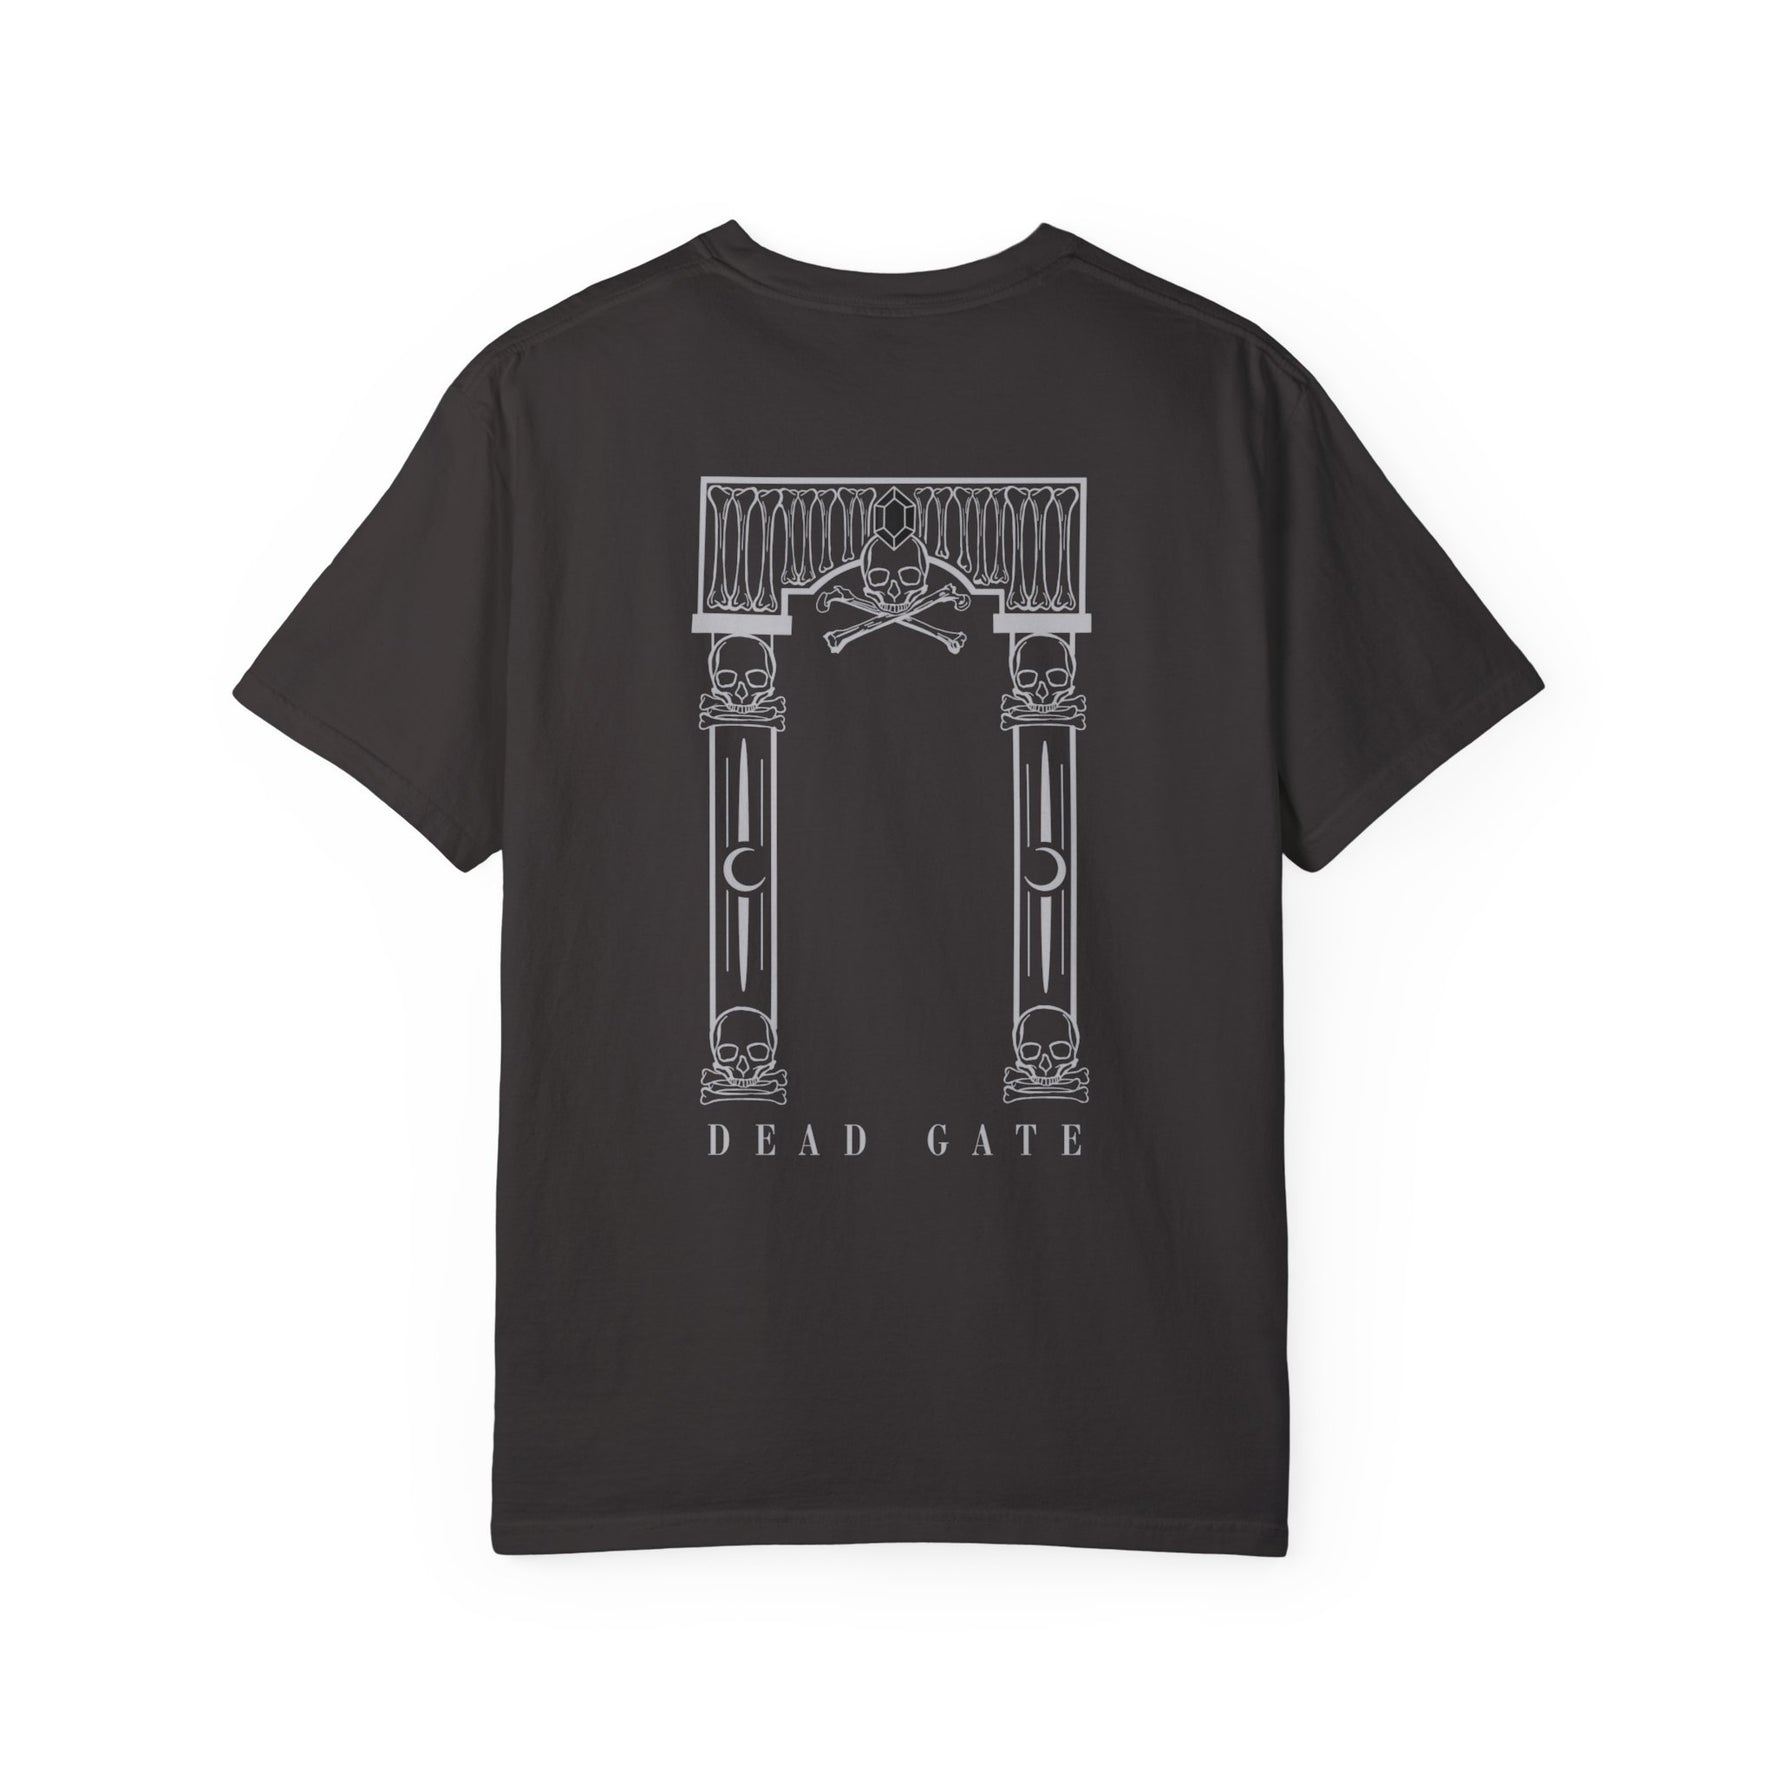 Crescent City Gate Tees